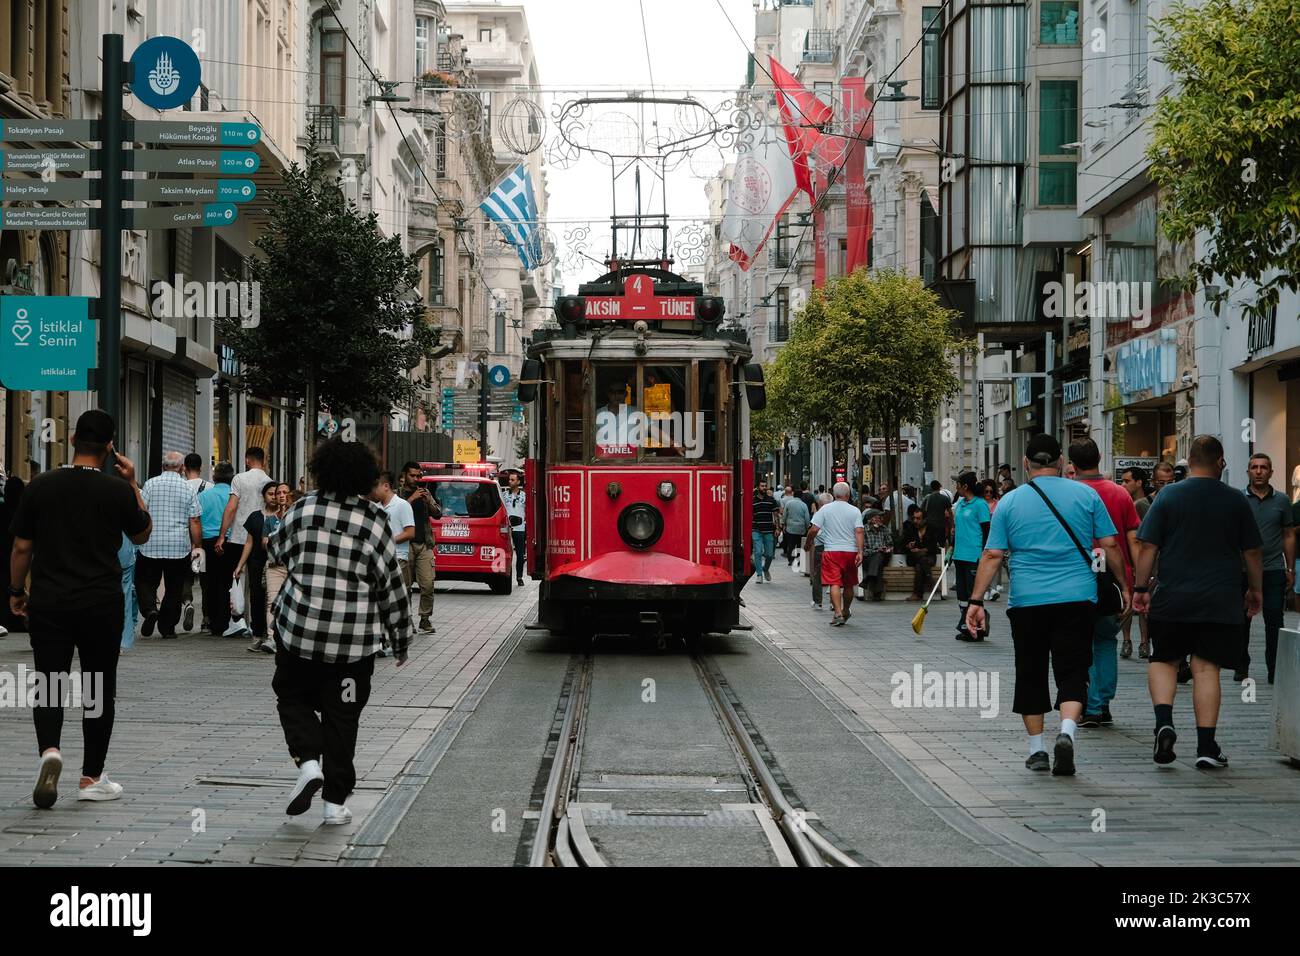 Front view of red tram in Istiklal street, cityscape in Istanbul, footage of popular red tram, retro street with walking people, old train Stock Photo